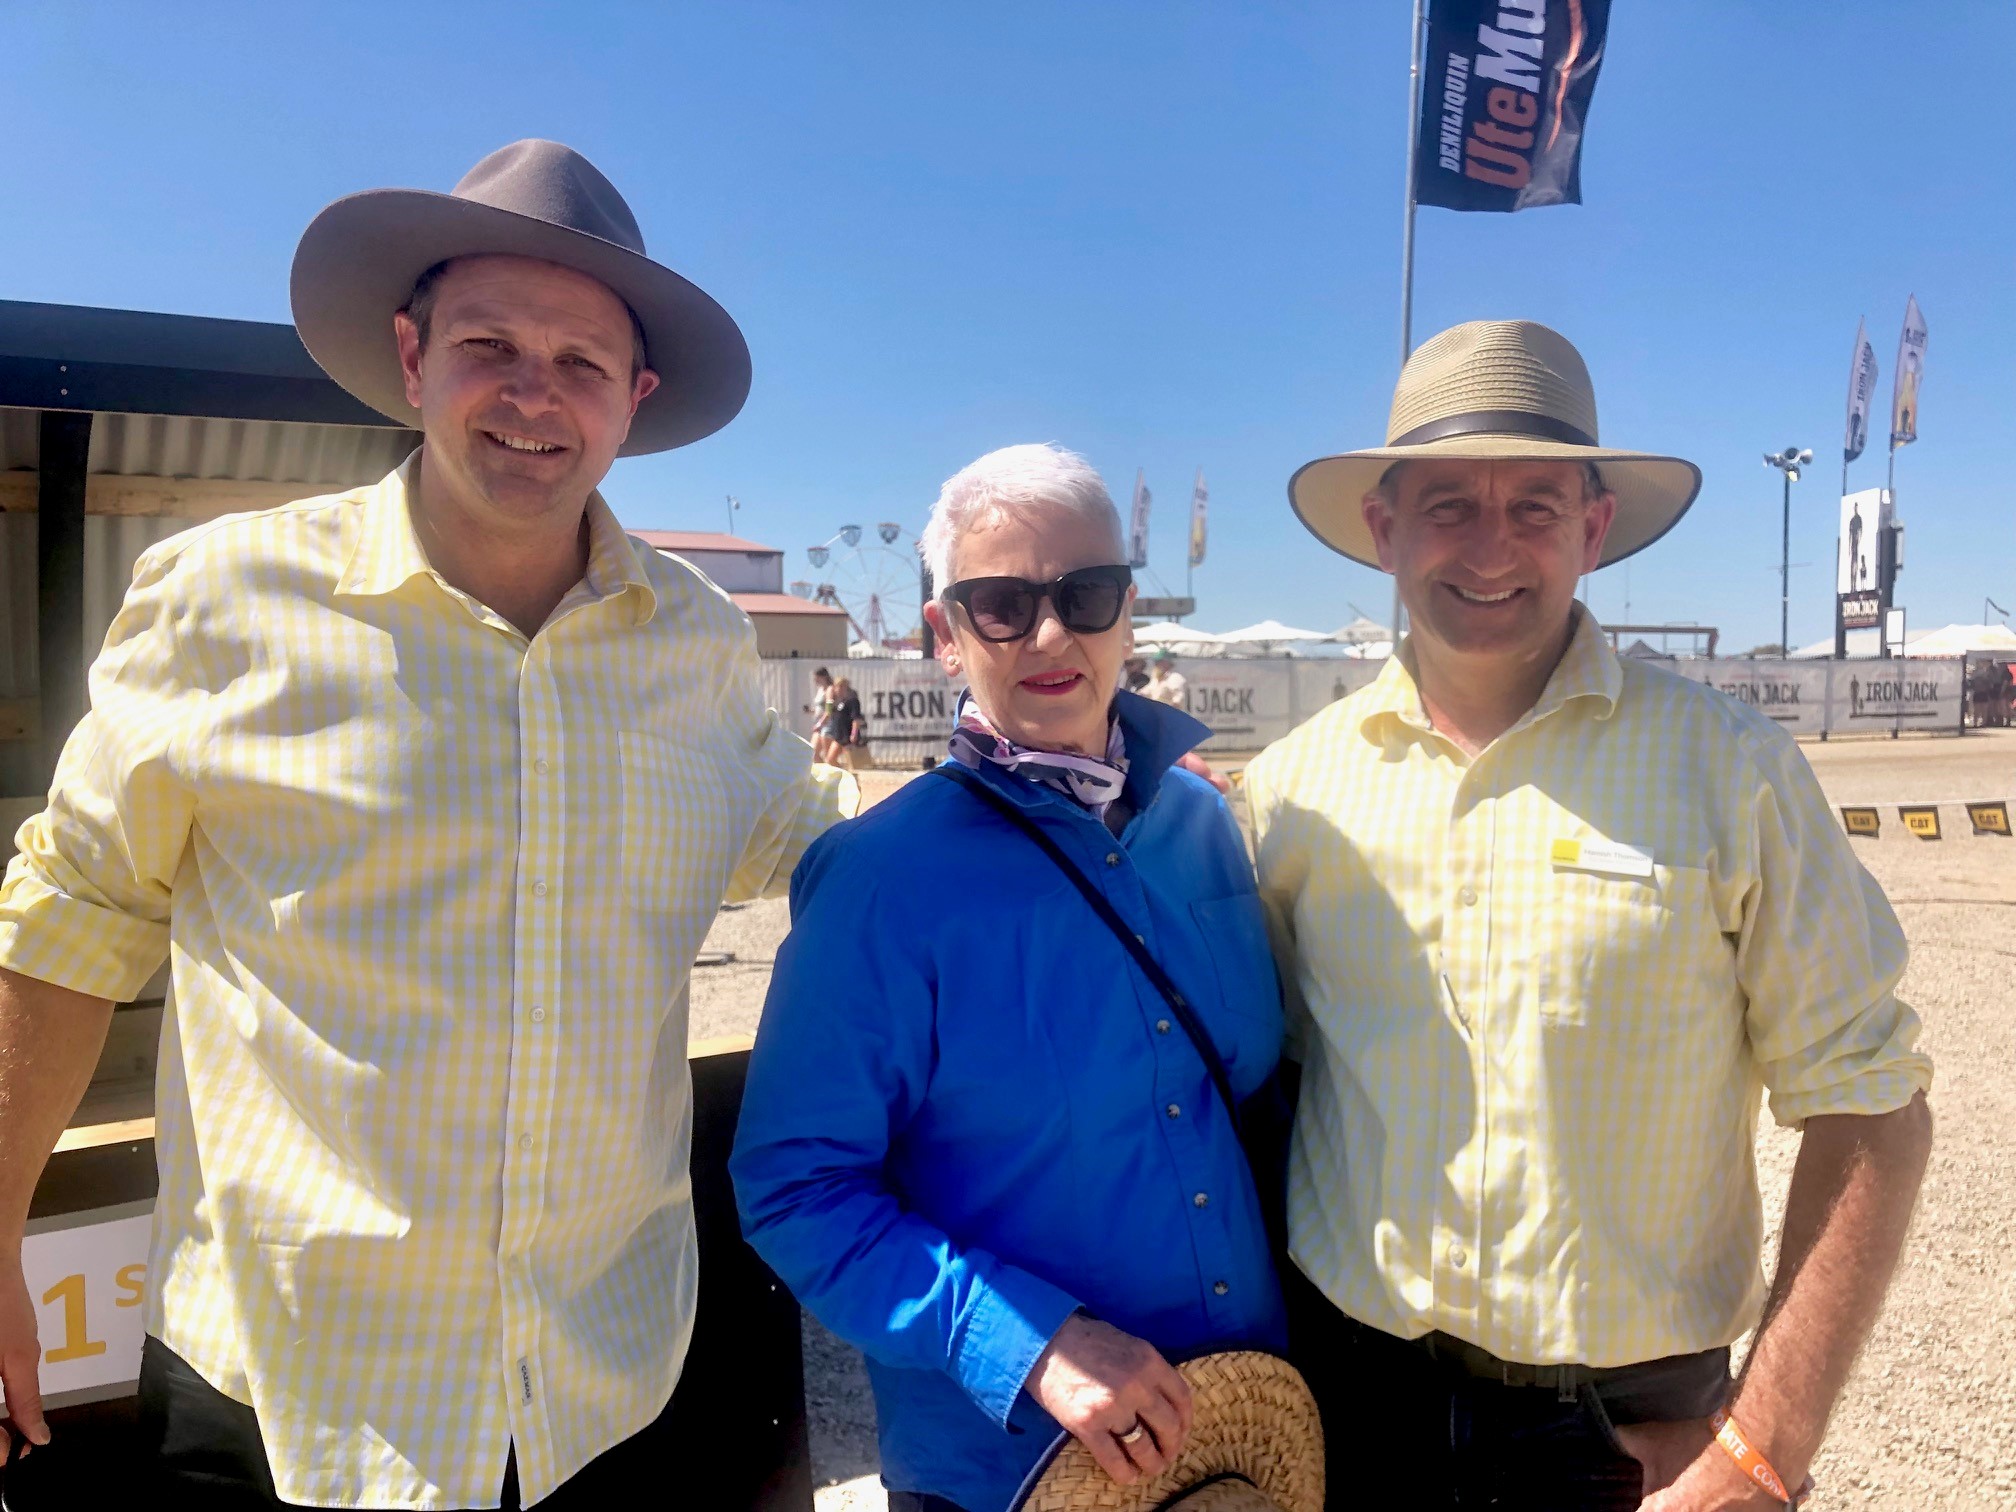 Ray White Deniliquin auctioneers Sam Hall and Hamish Thomson with Country Education Foundation Edward River Region committee member Marg Bull at the 2023 Deni Ute Muster sandpit auction fundraiser for CEF Edward River.